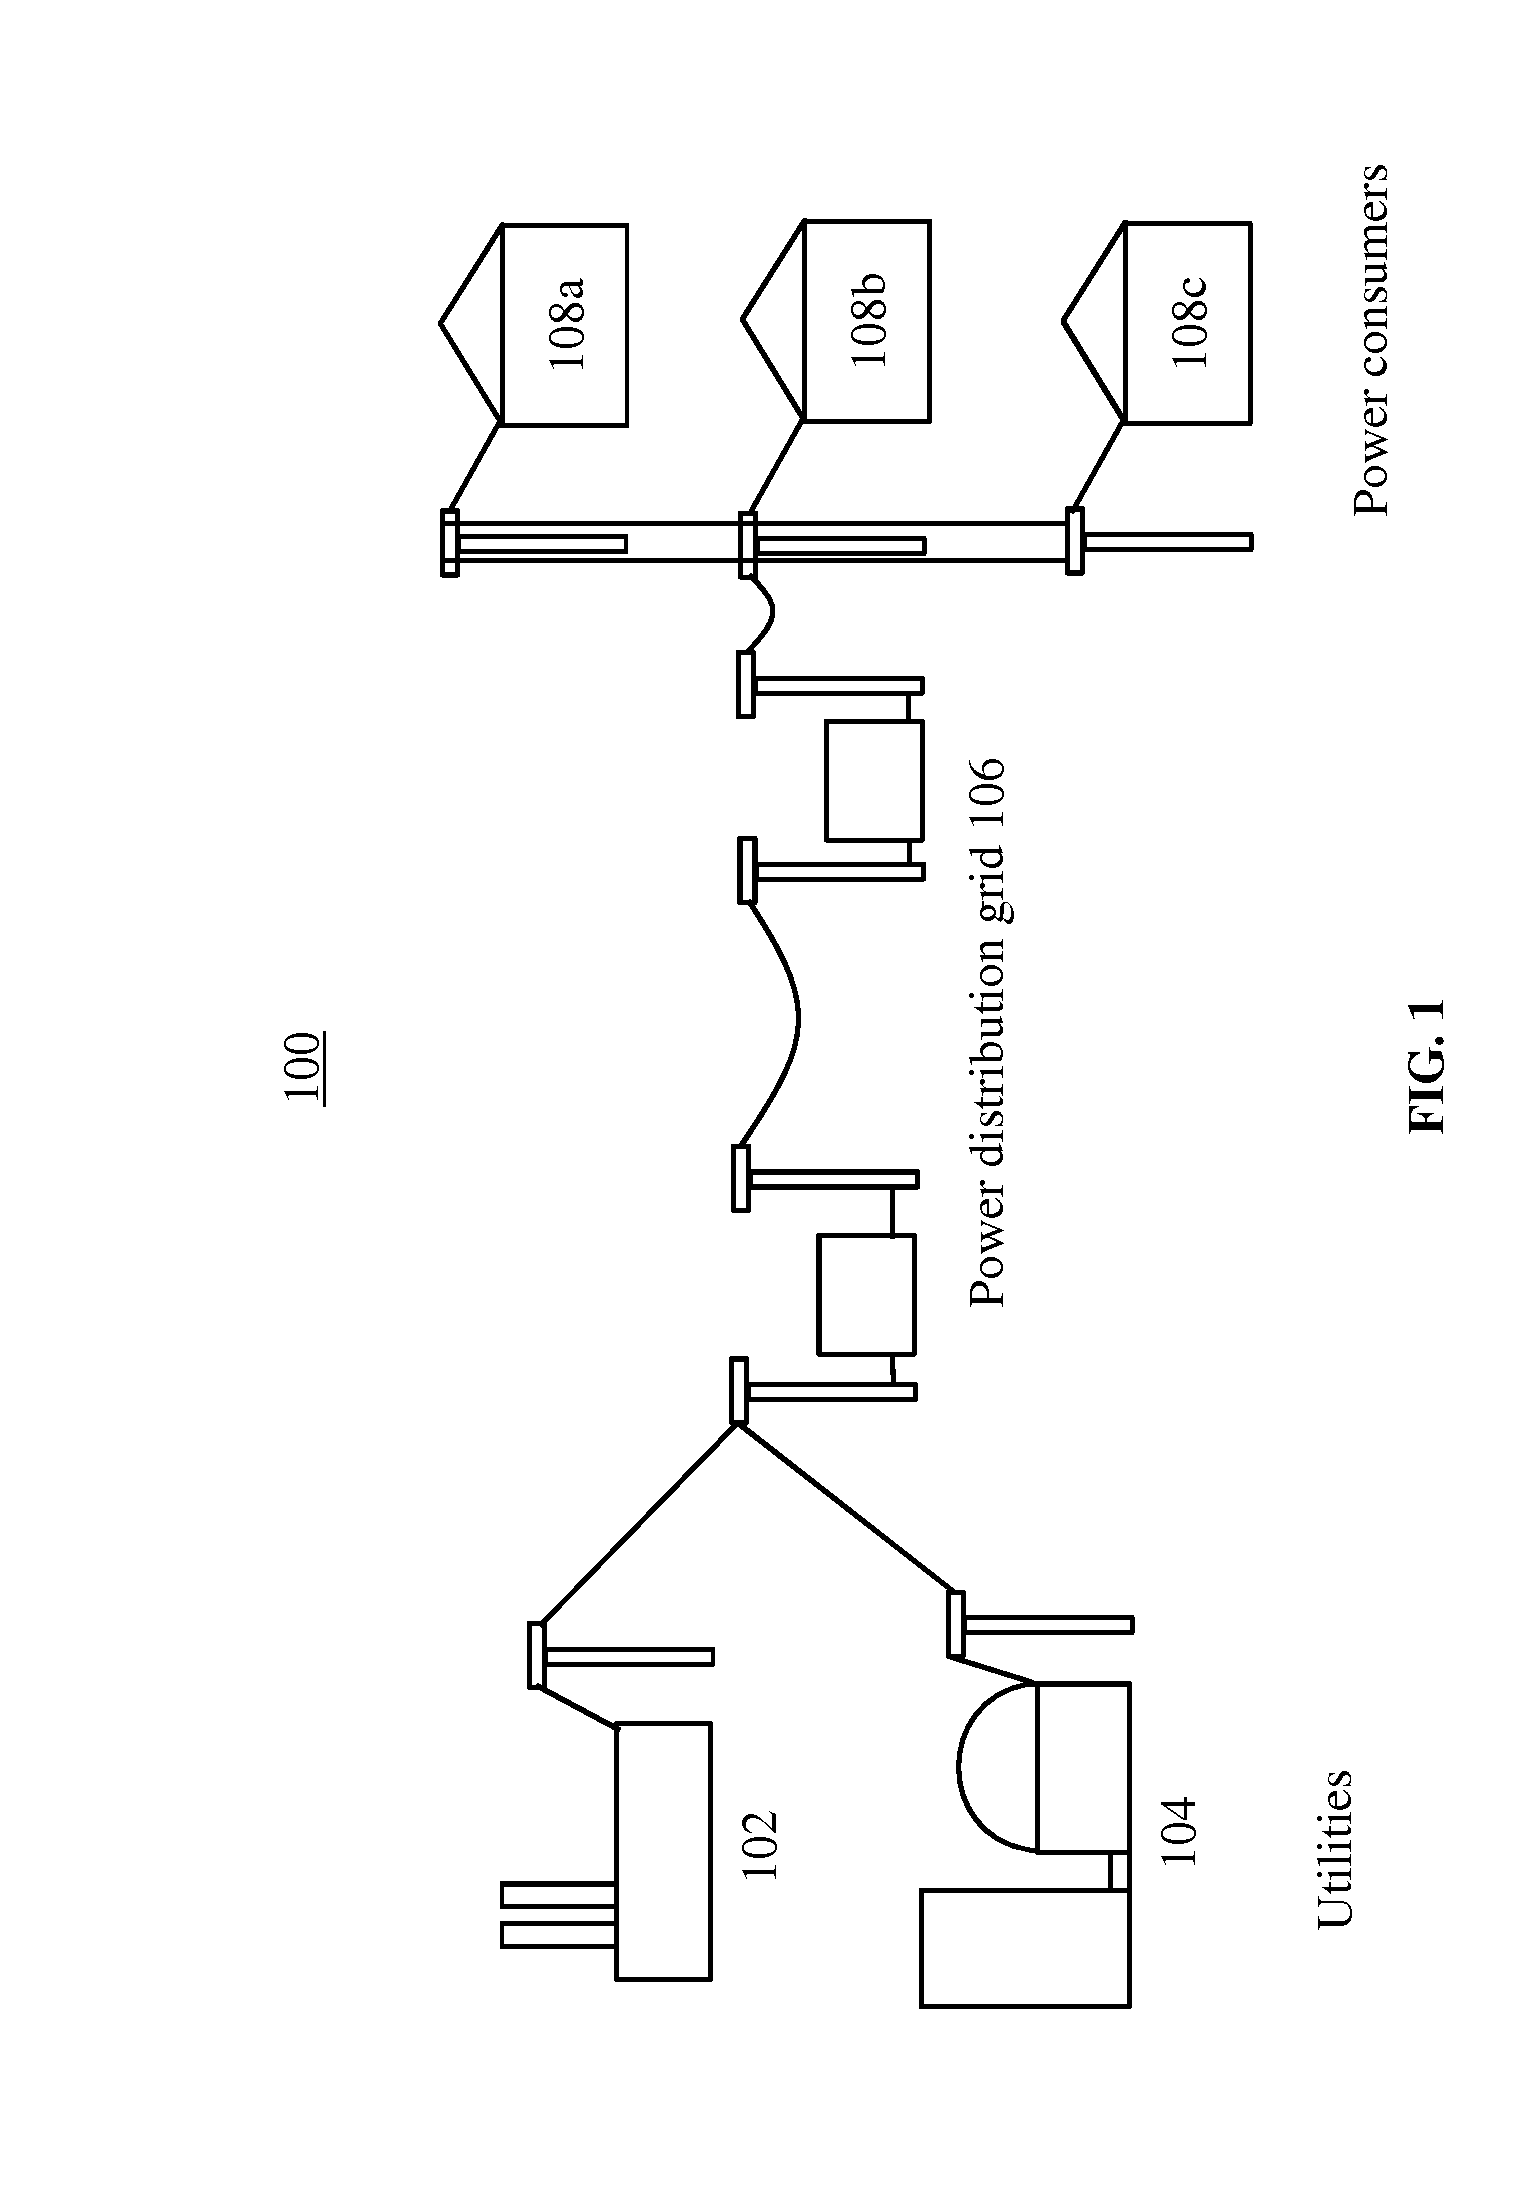 Systems and Methods for Power Demand Management